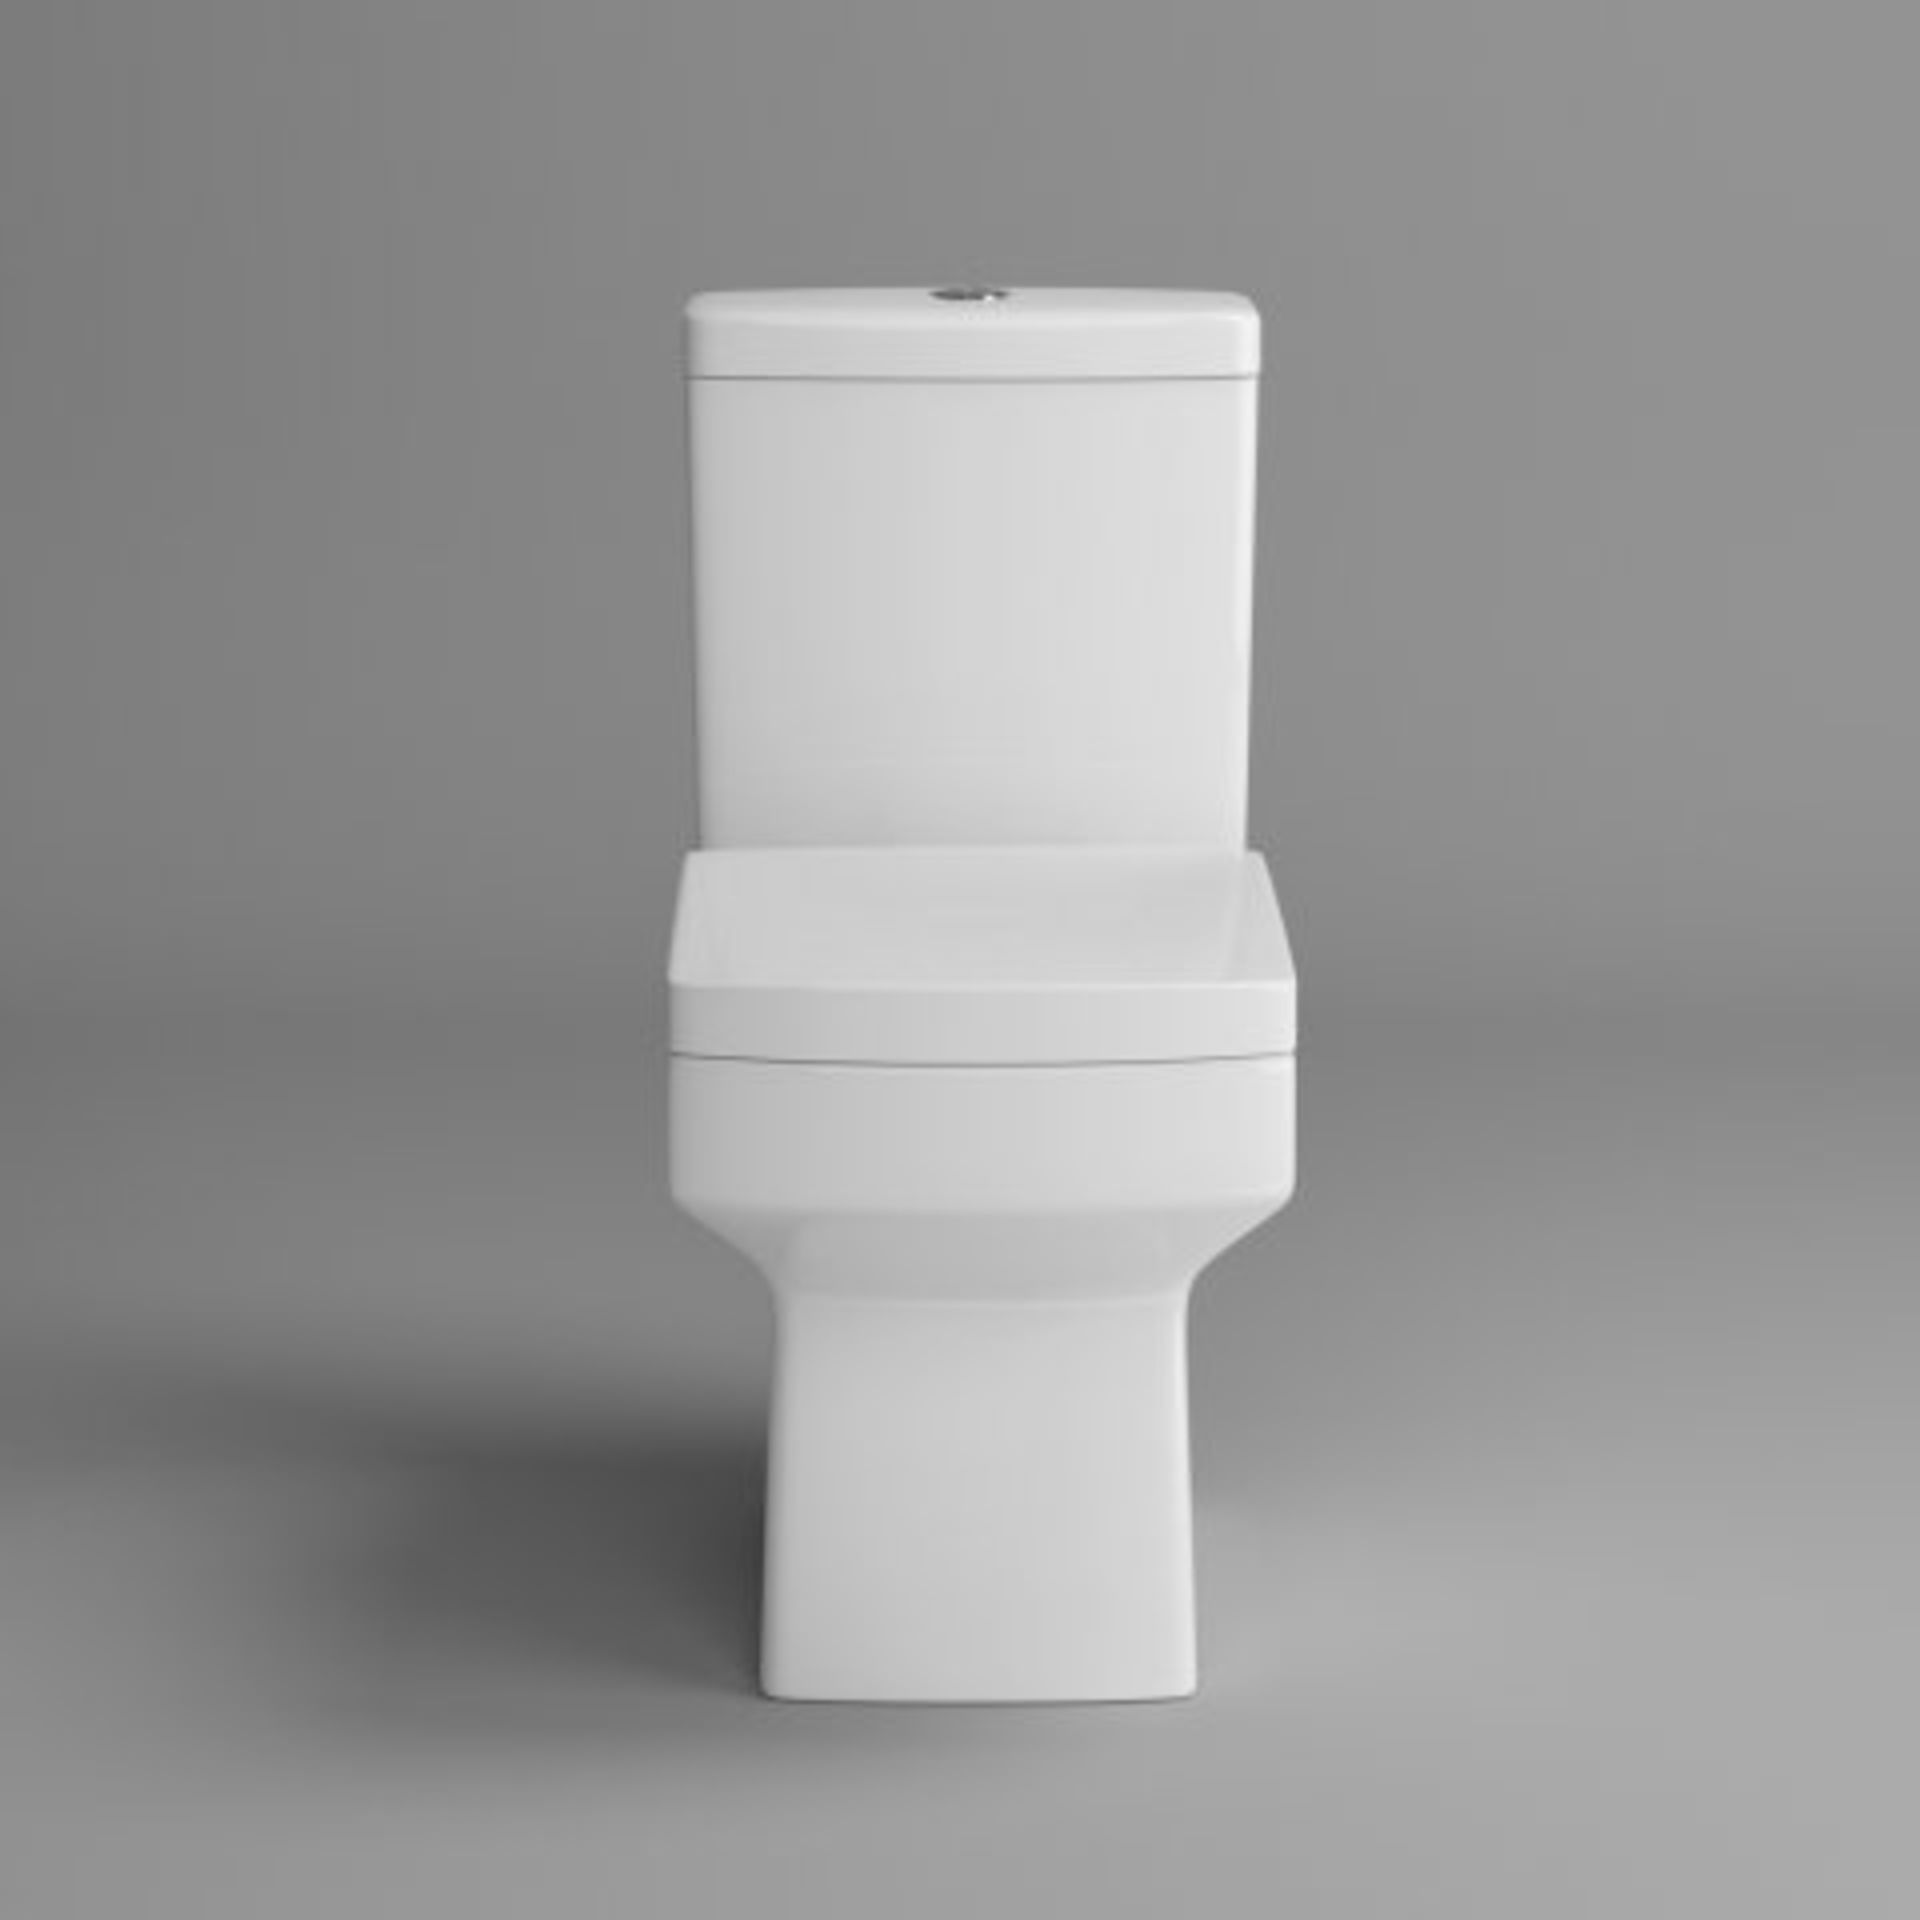 New Belfort Close Coupled Toilet & Pedestal Basin Set Rrp £779.99 Manufactured From High Quali... - Image 2 of 2